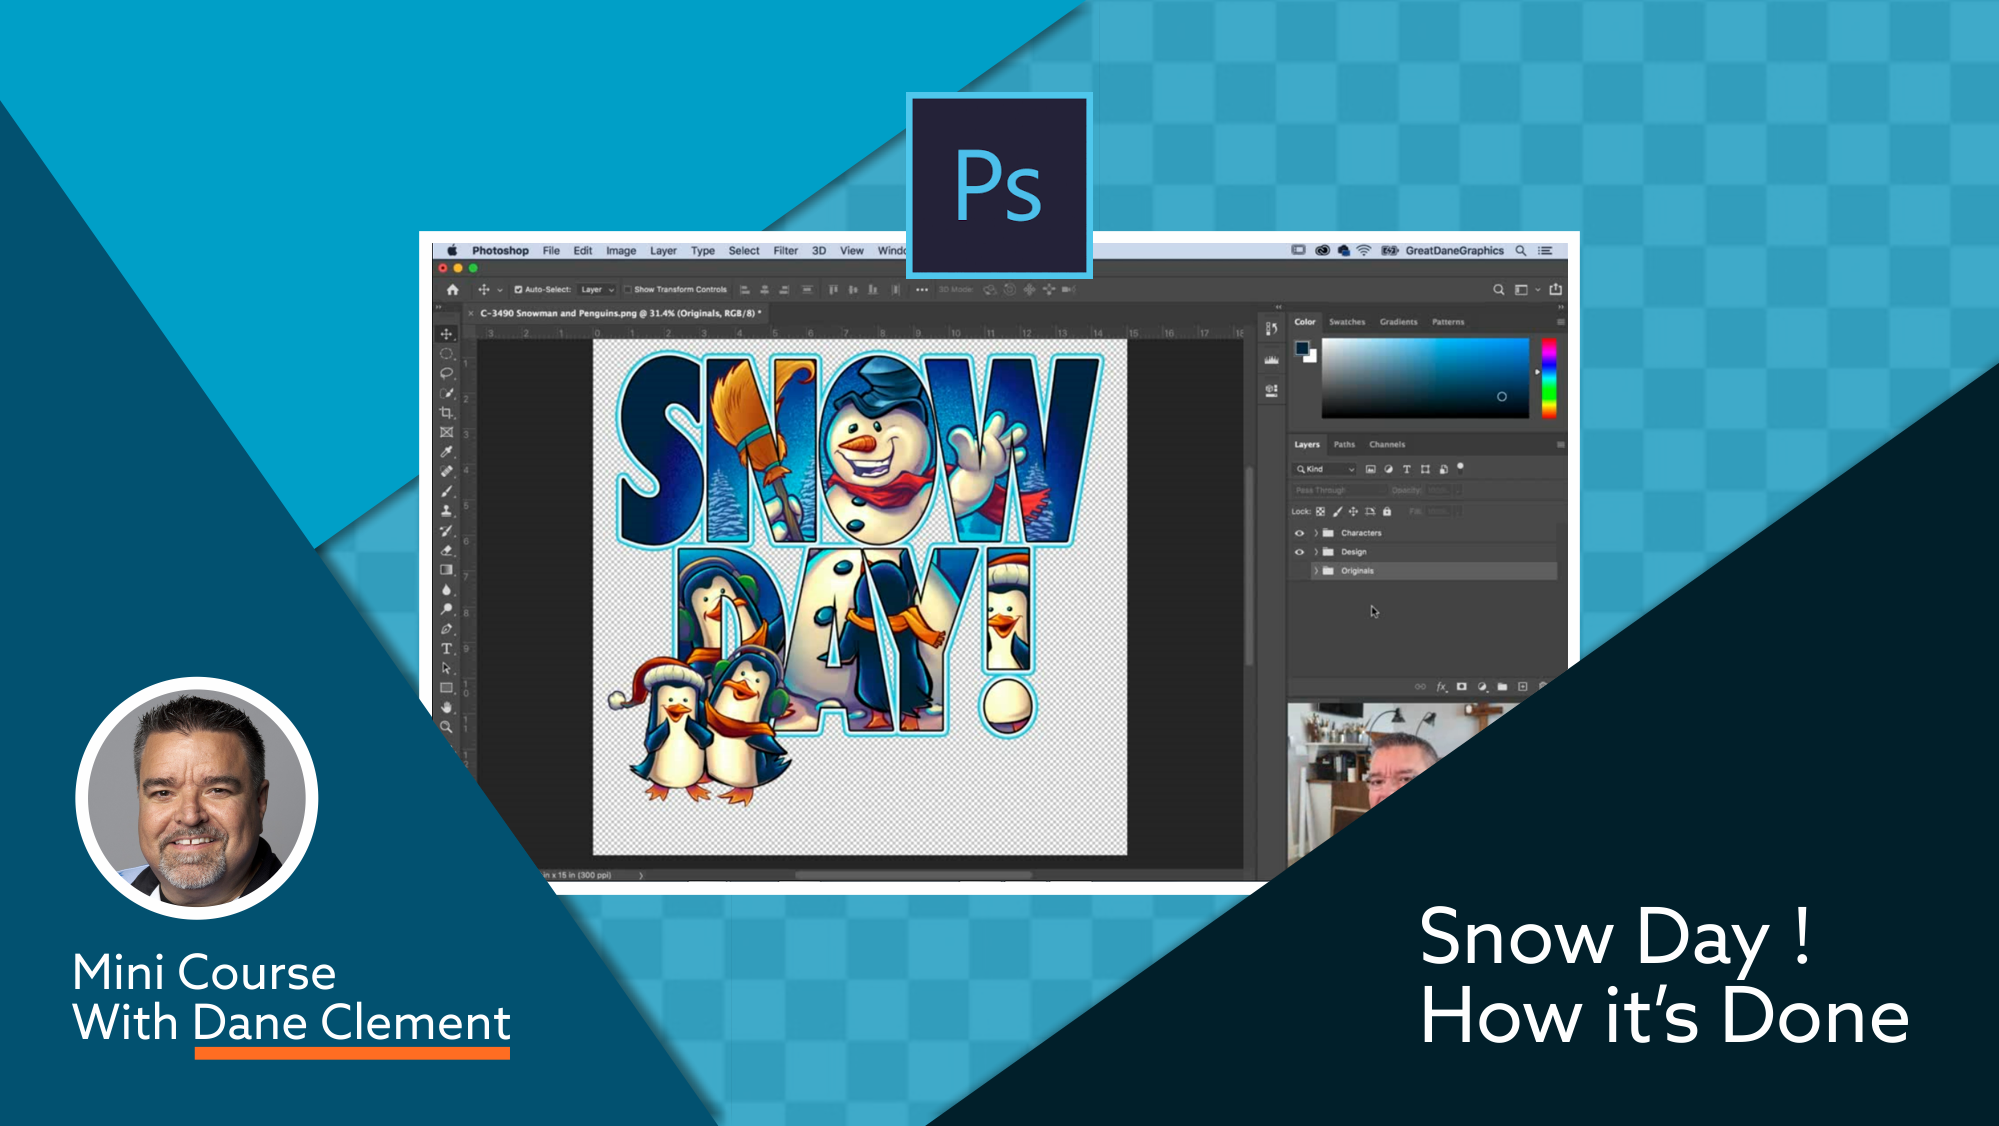 Snow Day in Photoshop